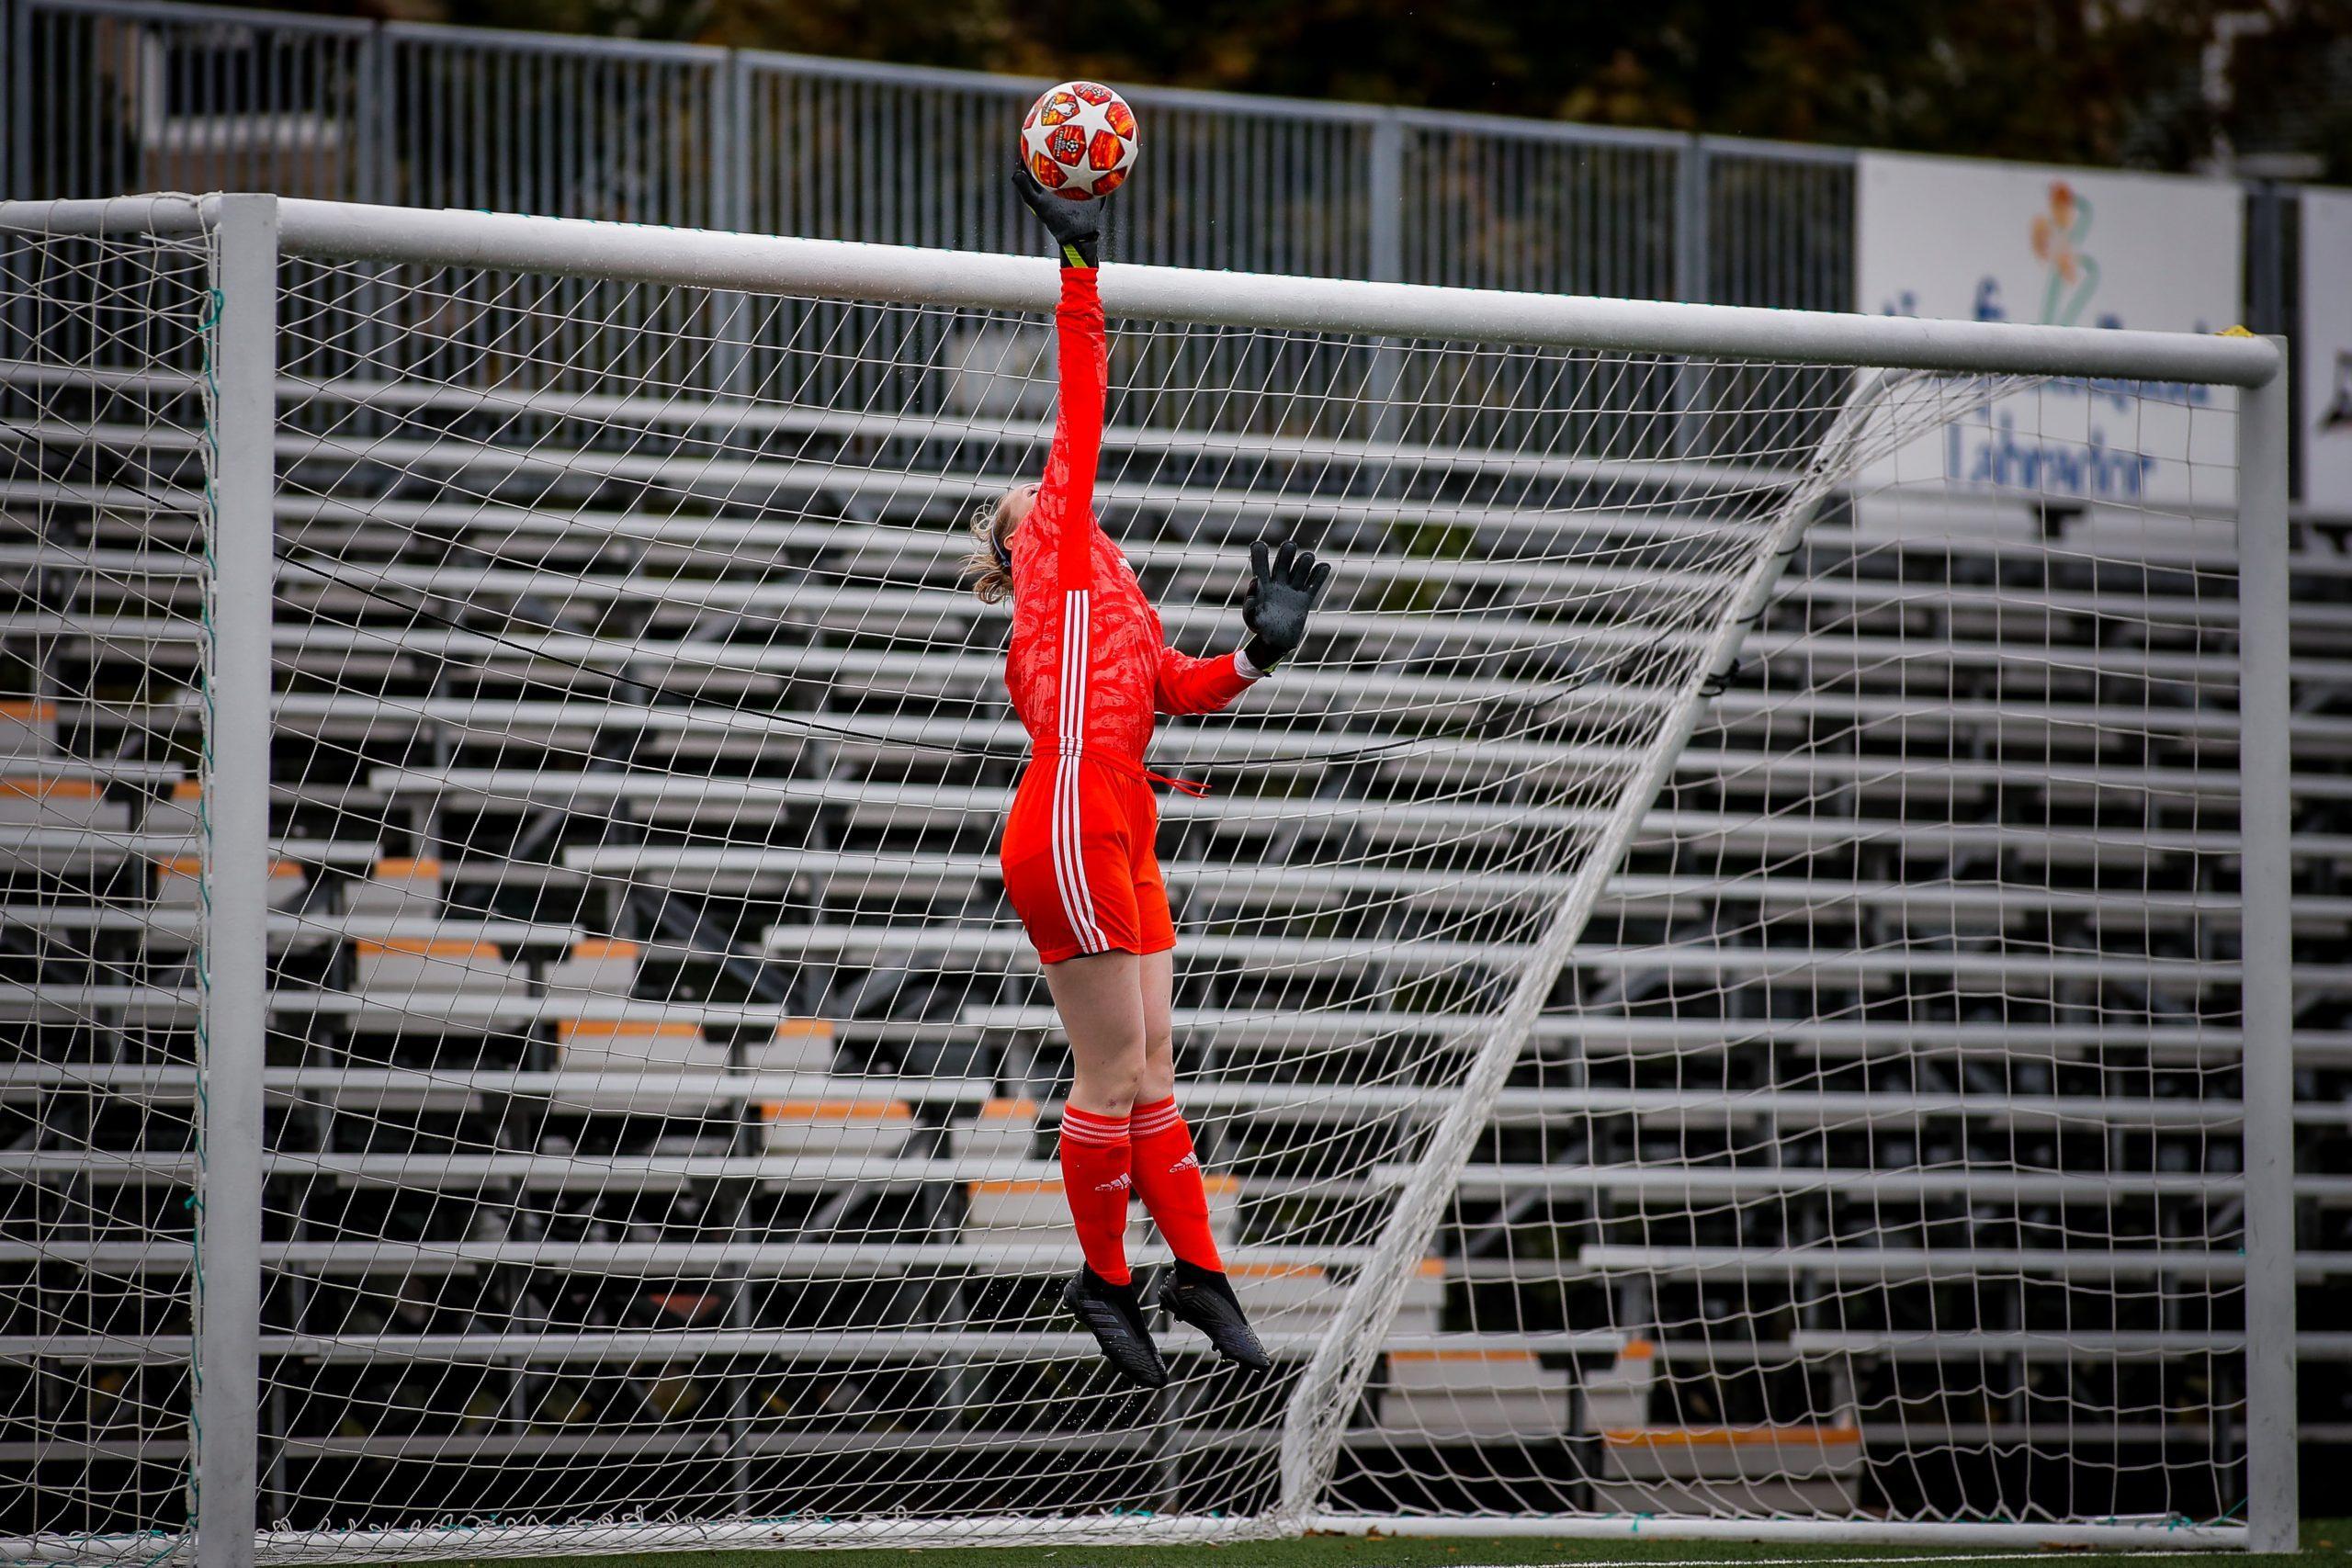 A female goalkeeper in red leaps to tip the ball over the crossbar in the rain